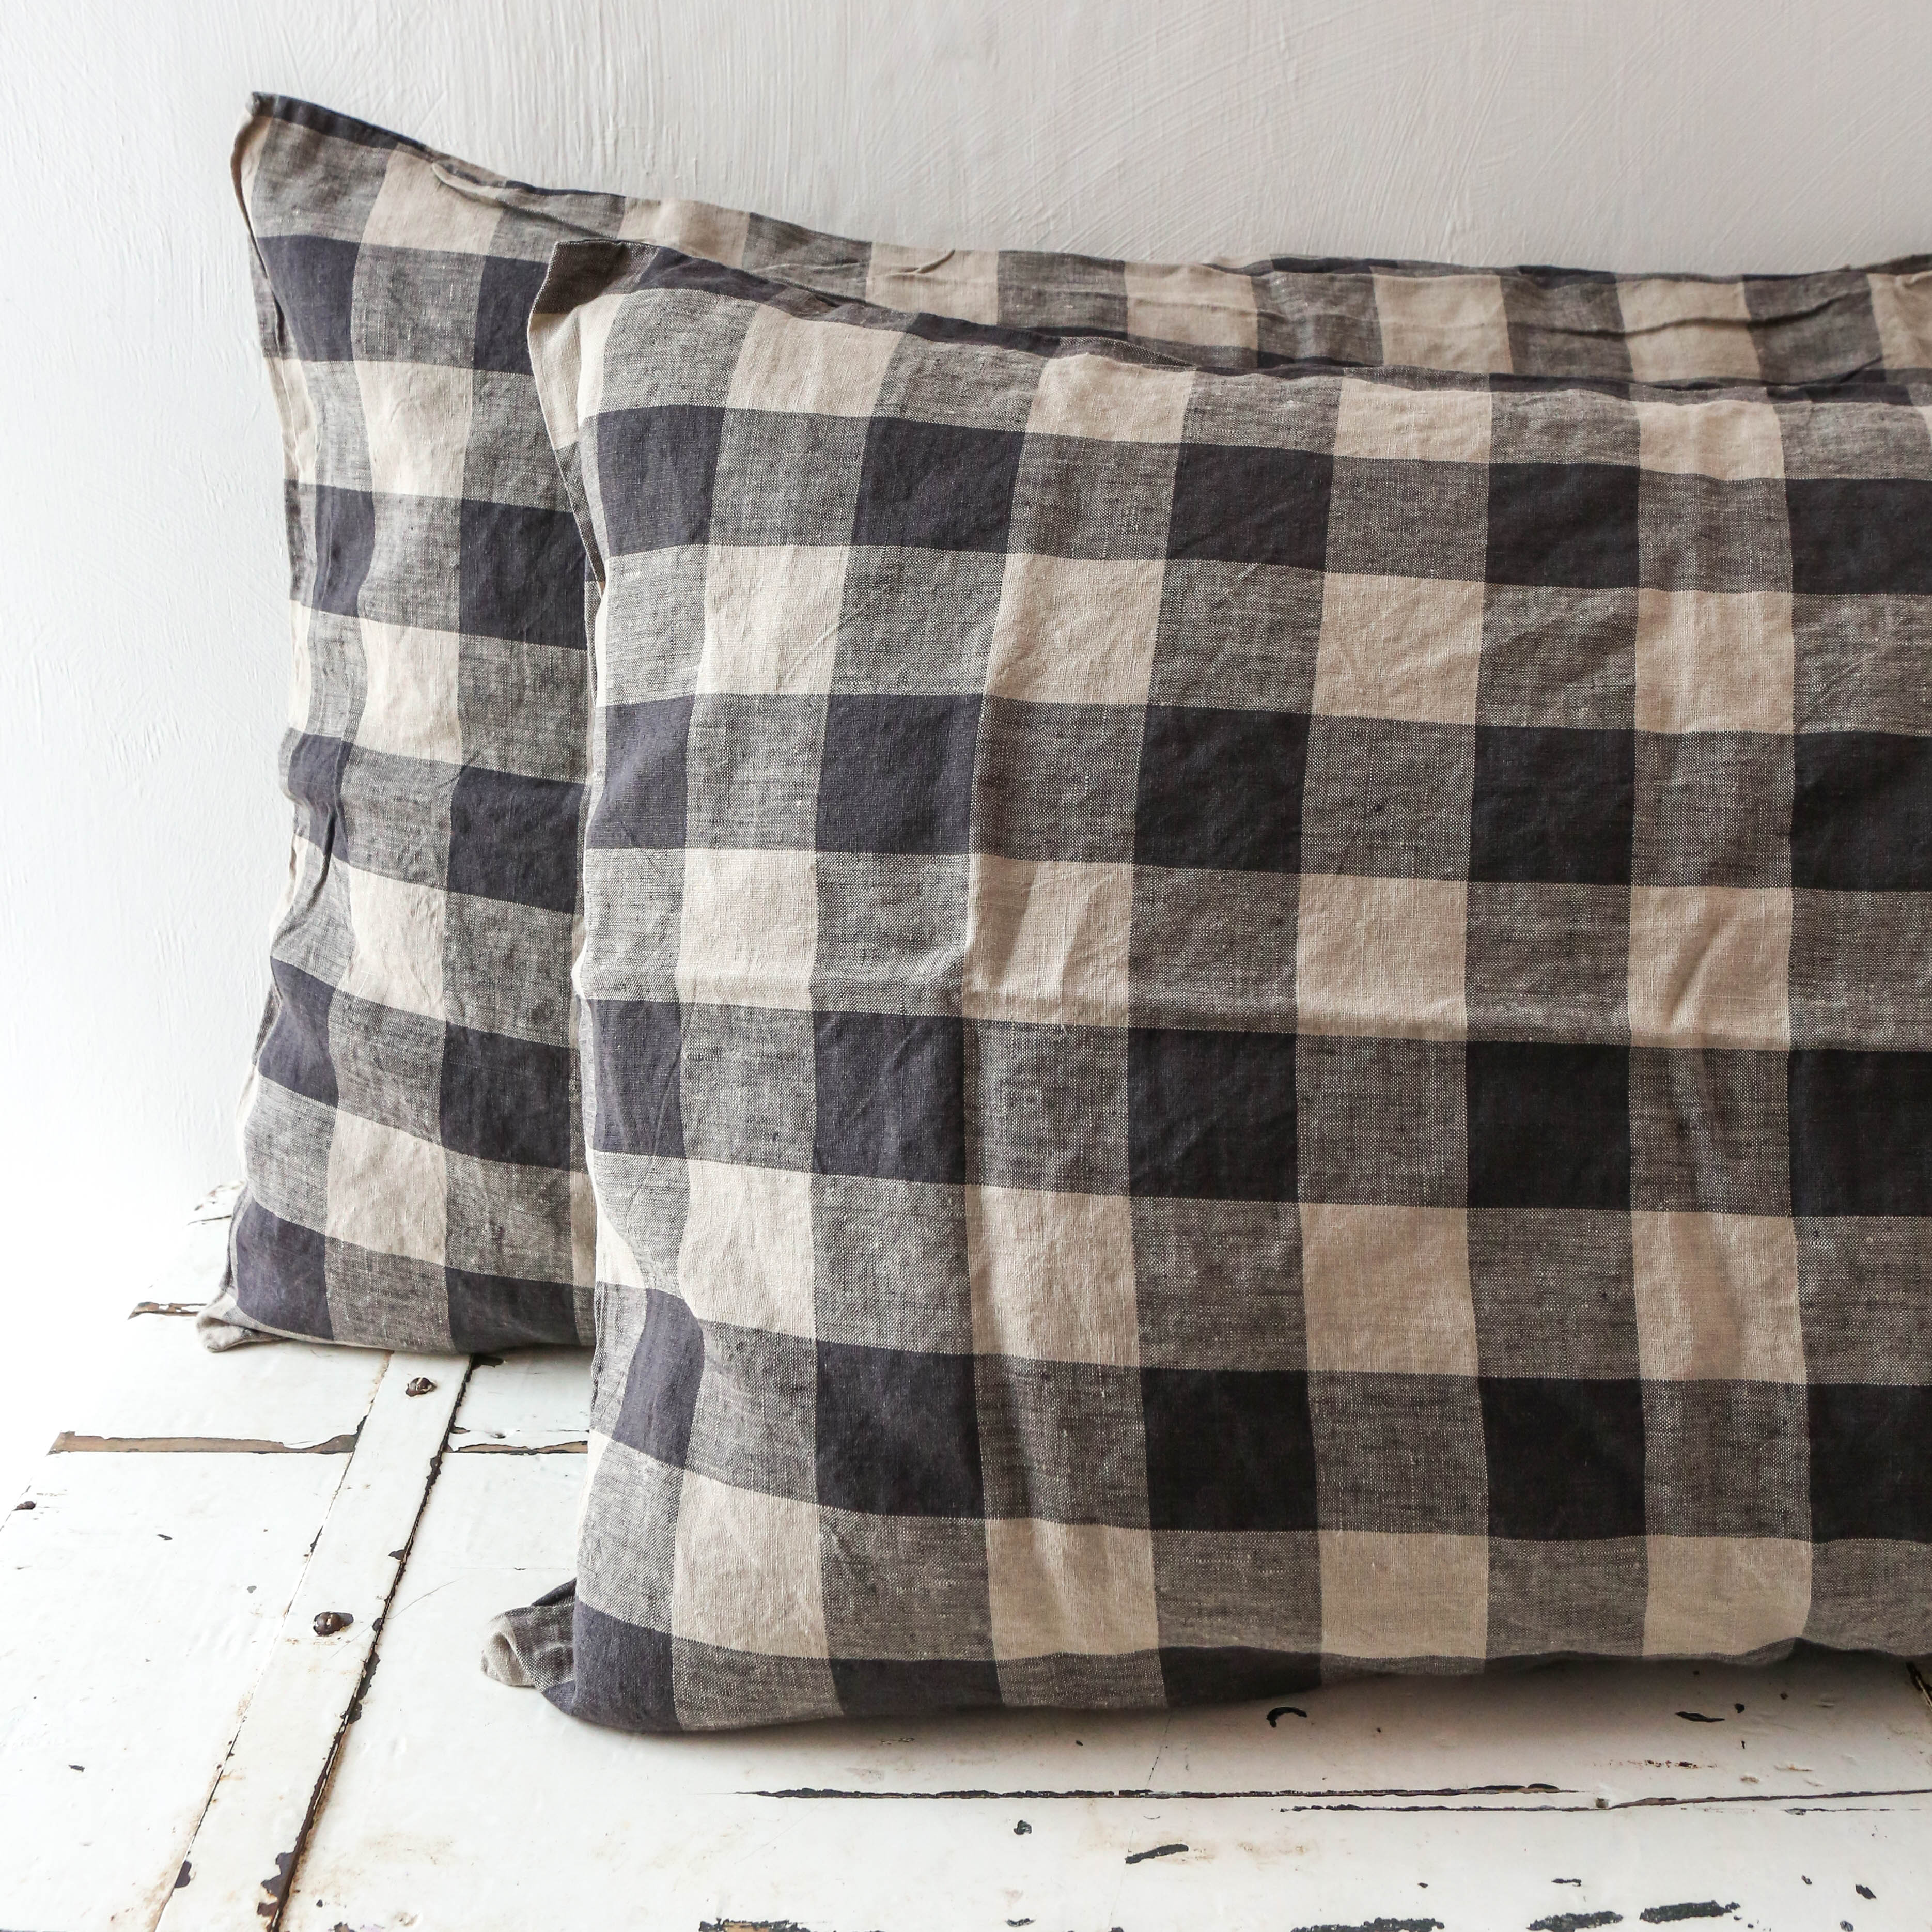 Society of Wanderers Pair Of Pillowcases - Licorice Gingham